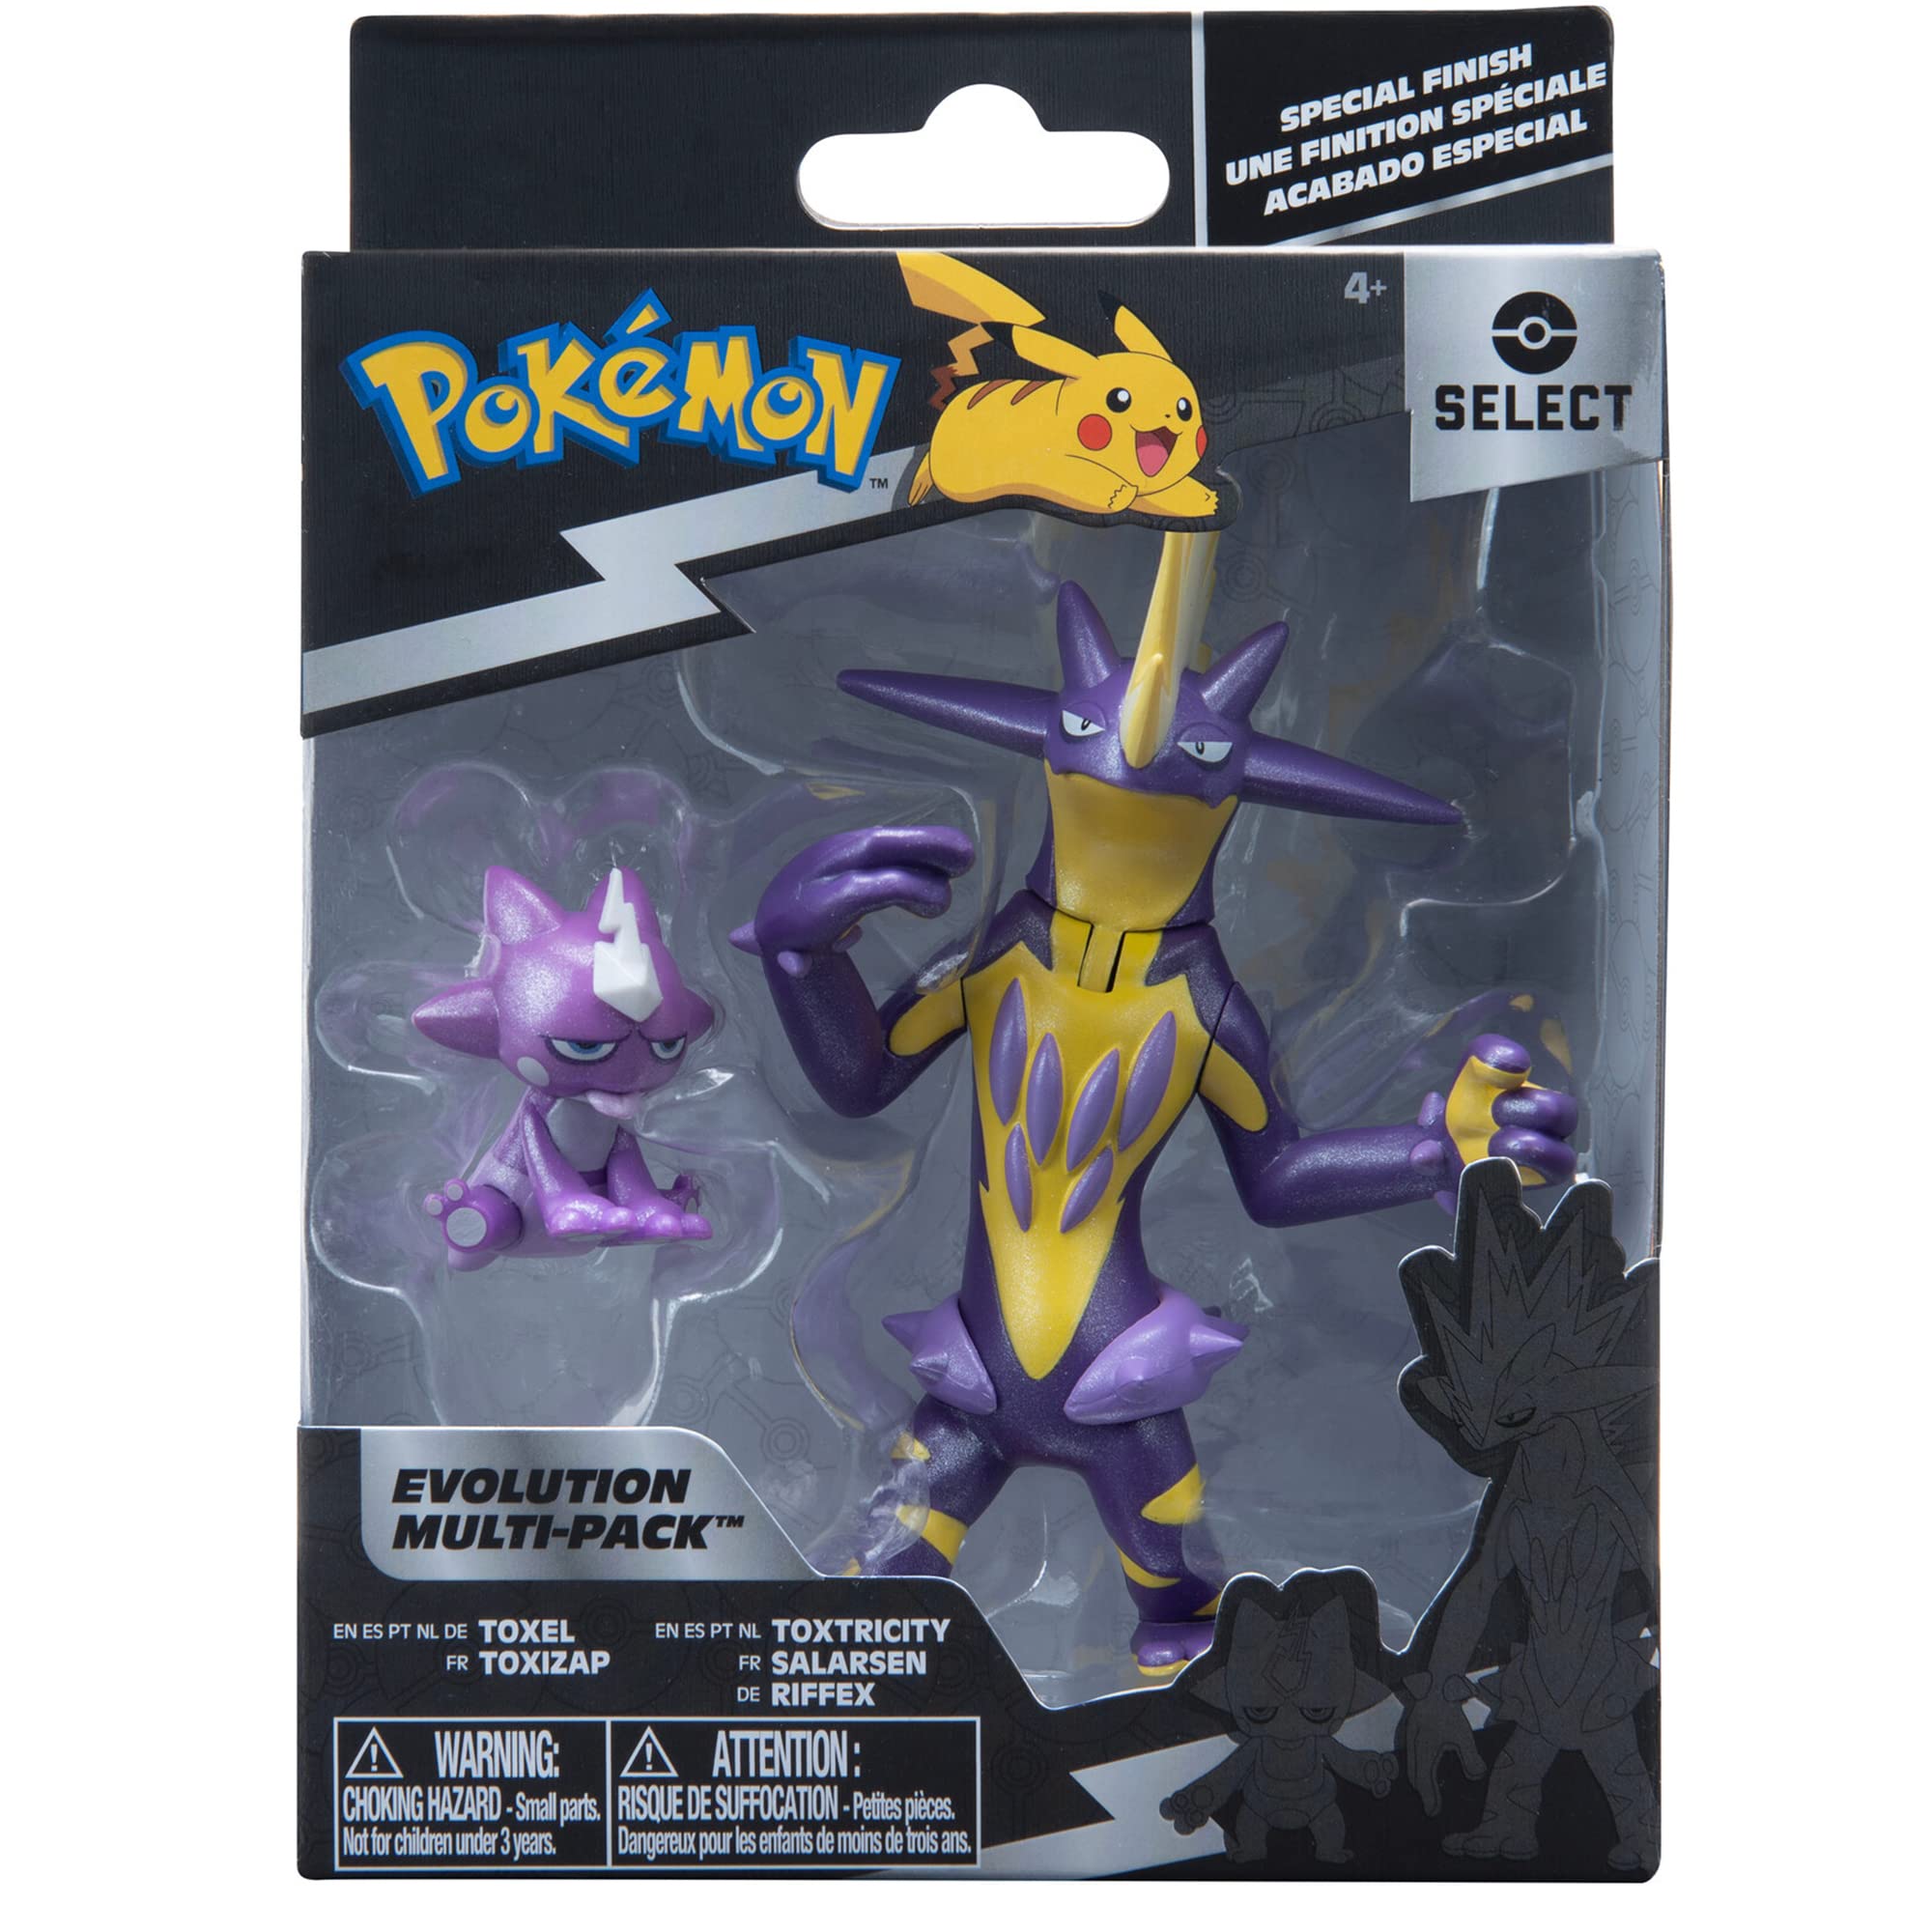 Pokemon Select Evolution 2 Evolution Pack - Features 2-Inch Toxel and 3-Inch Toxtricity Battle Figures